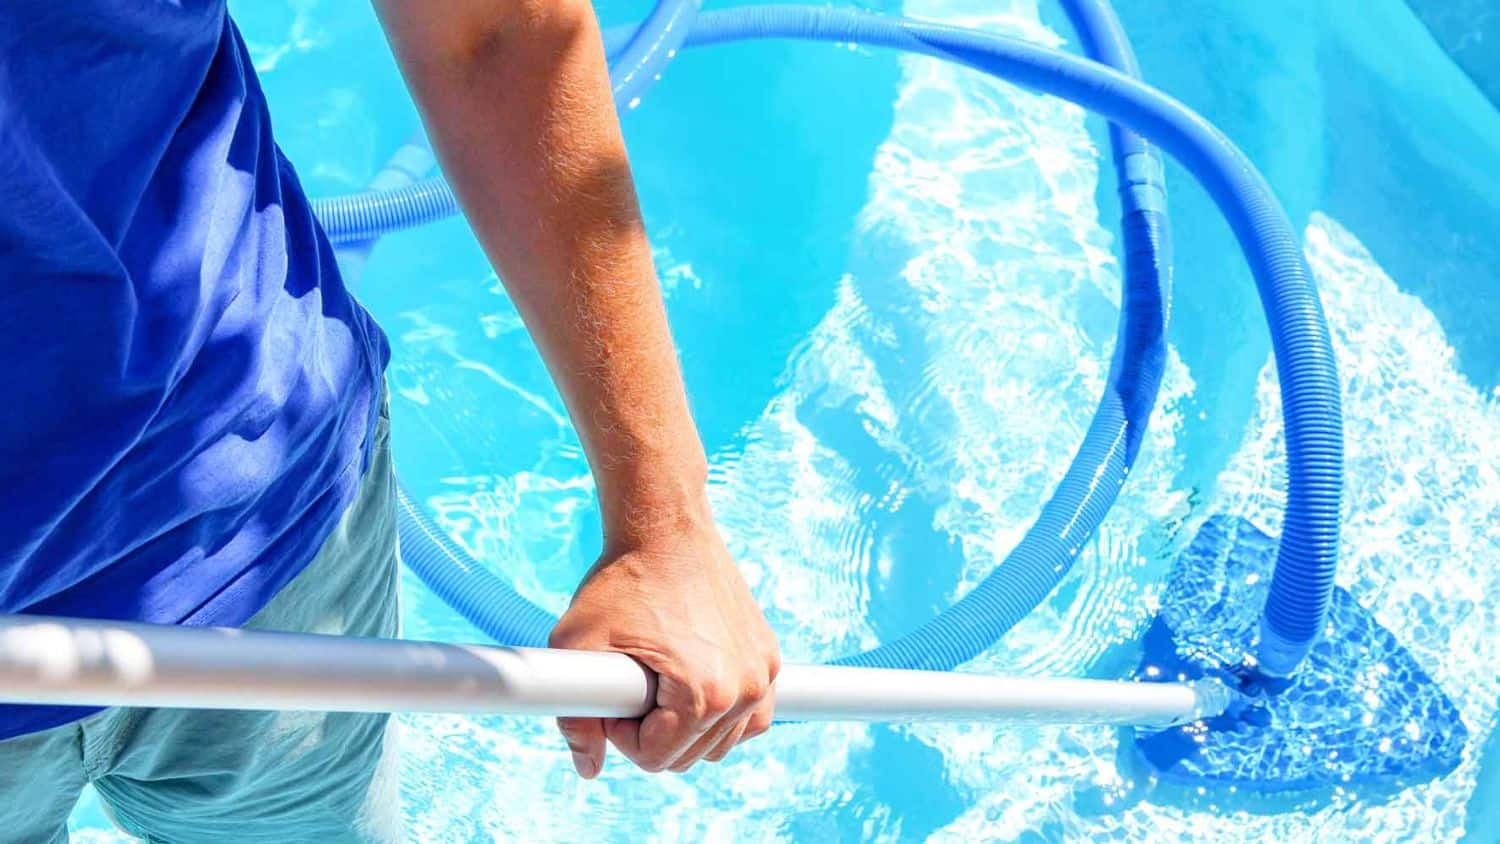 Pool Maintenance Checklist For Homeowners